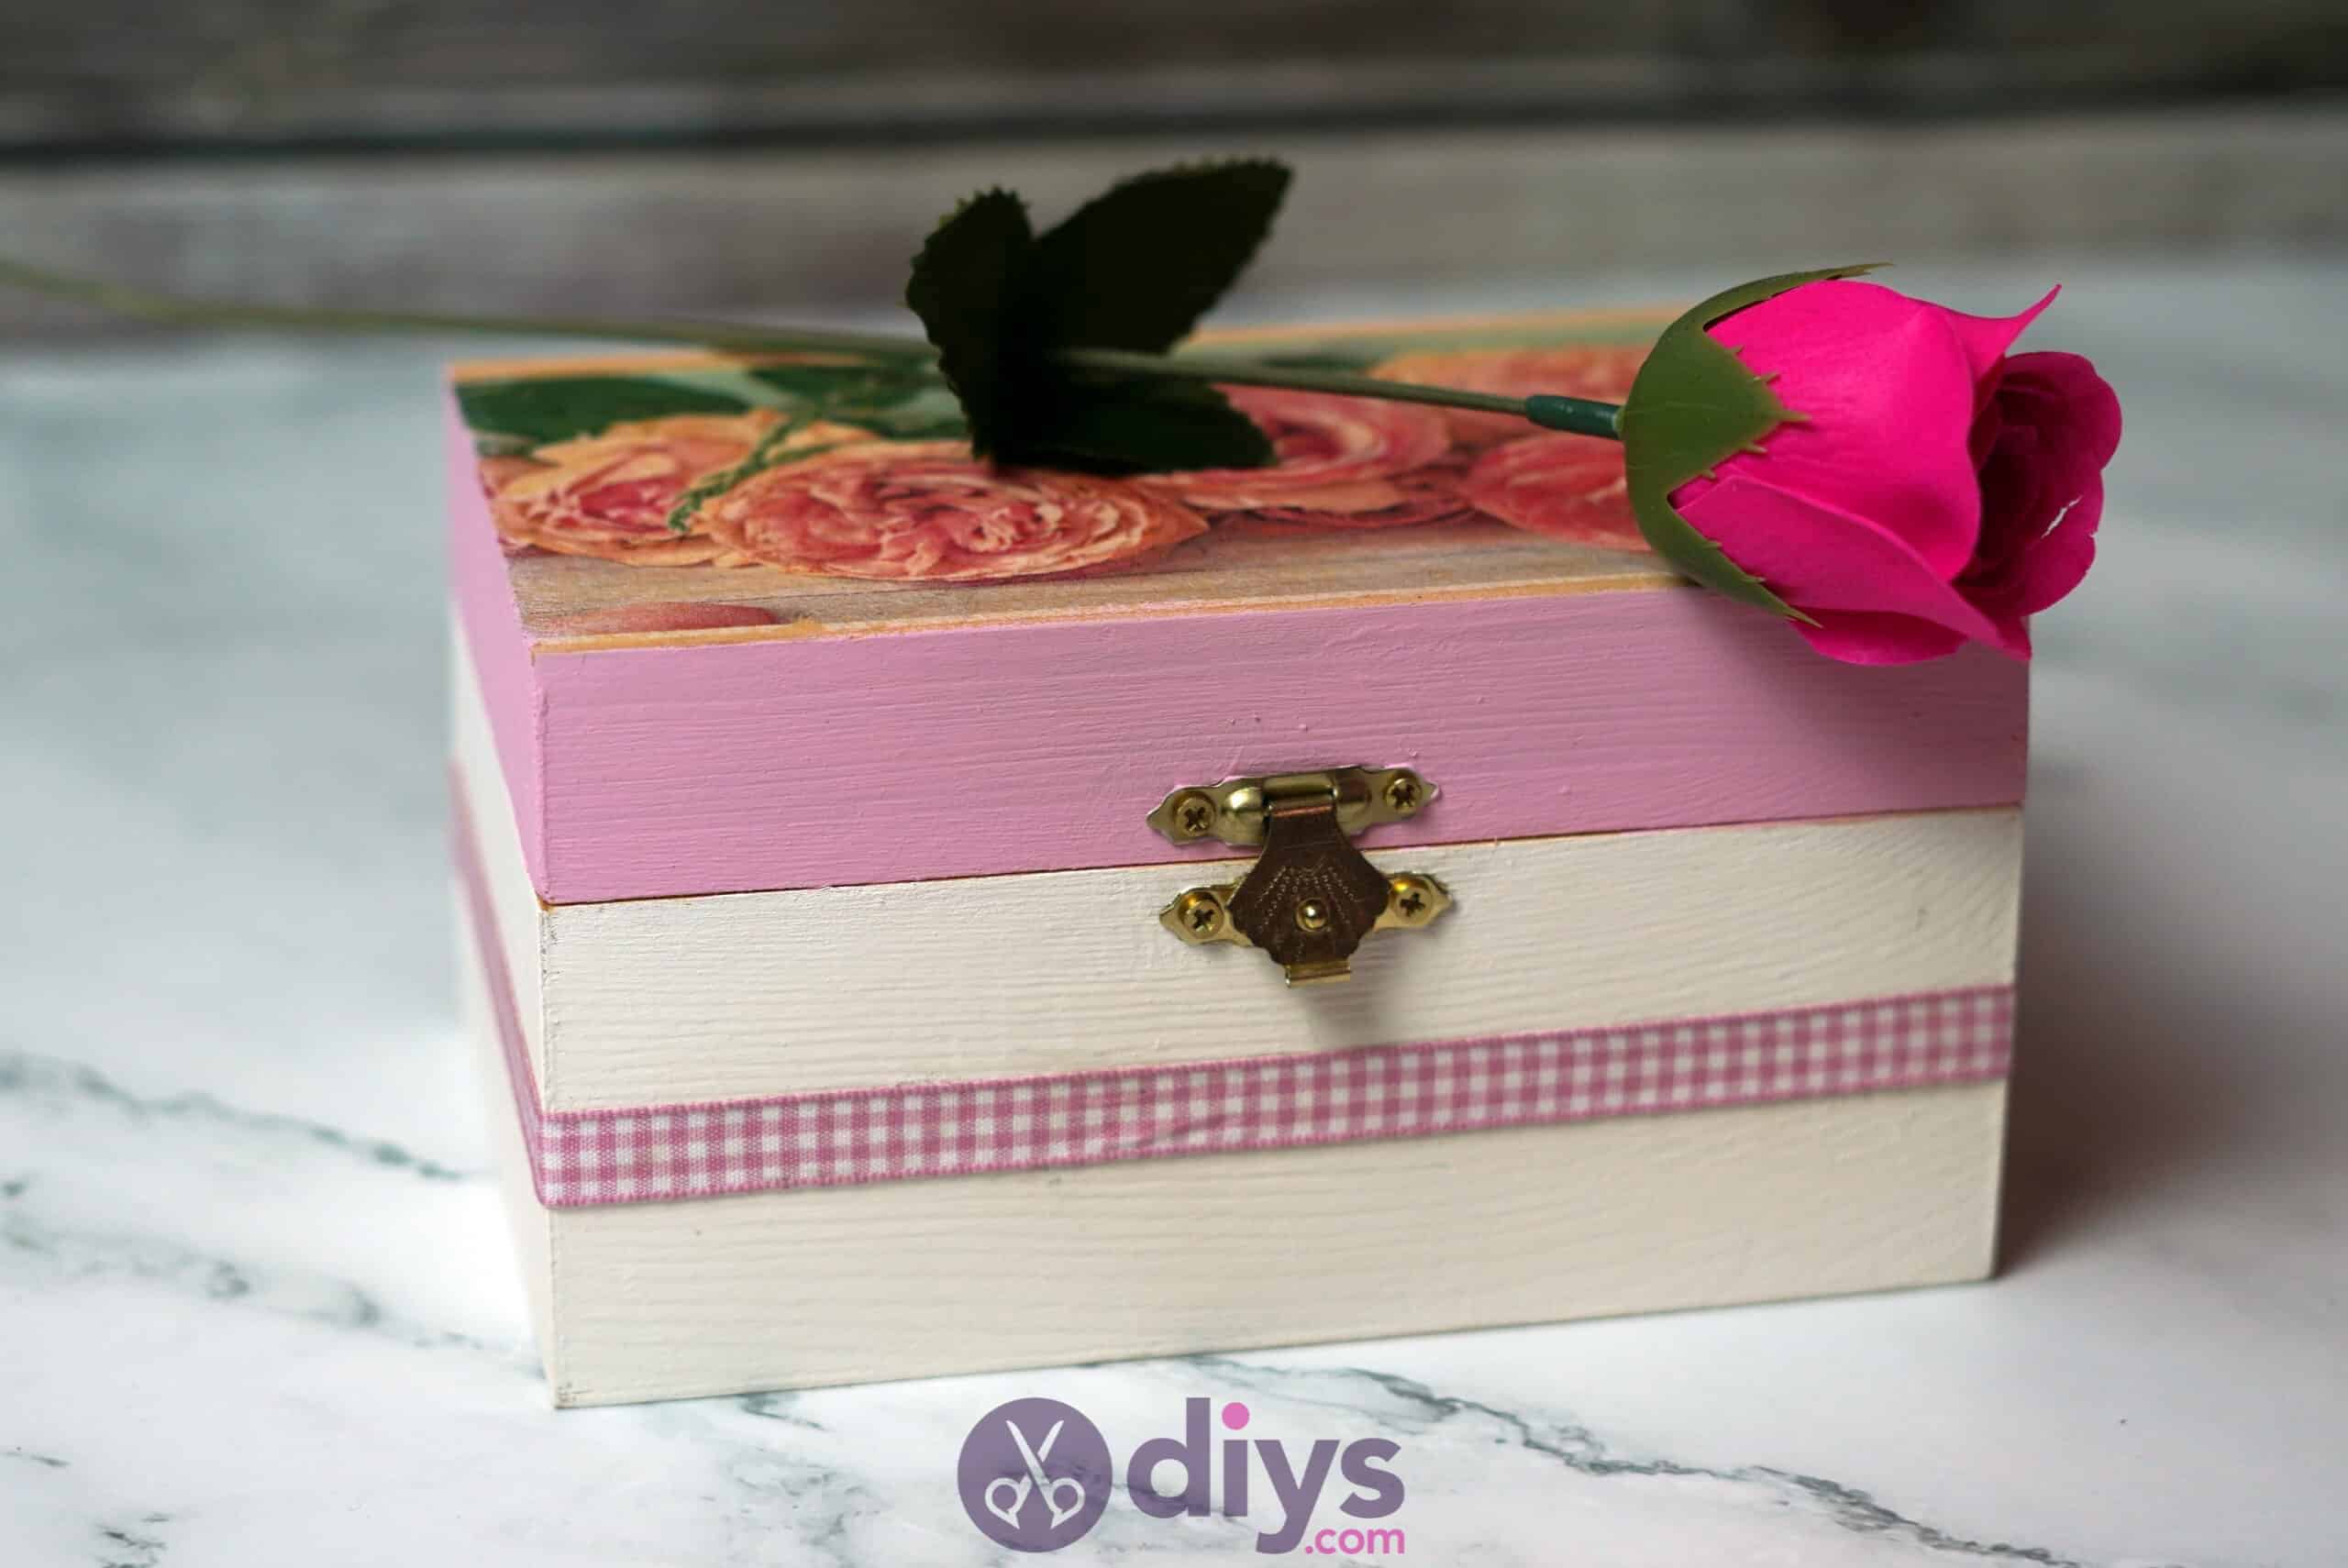 Upcycled vintage jewelry box decoupaged and painted with grey and pink colors